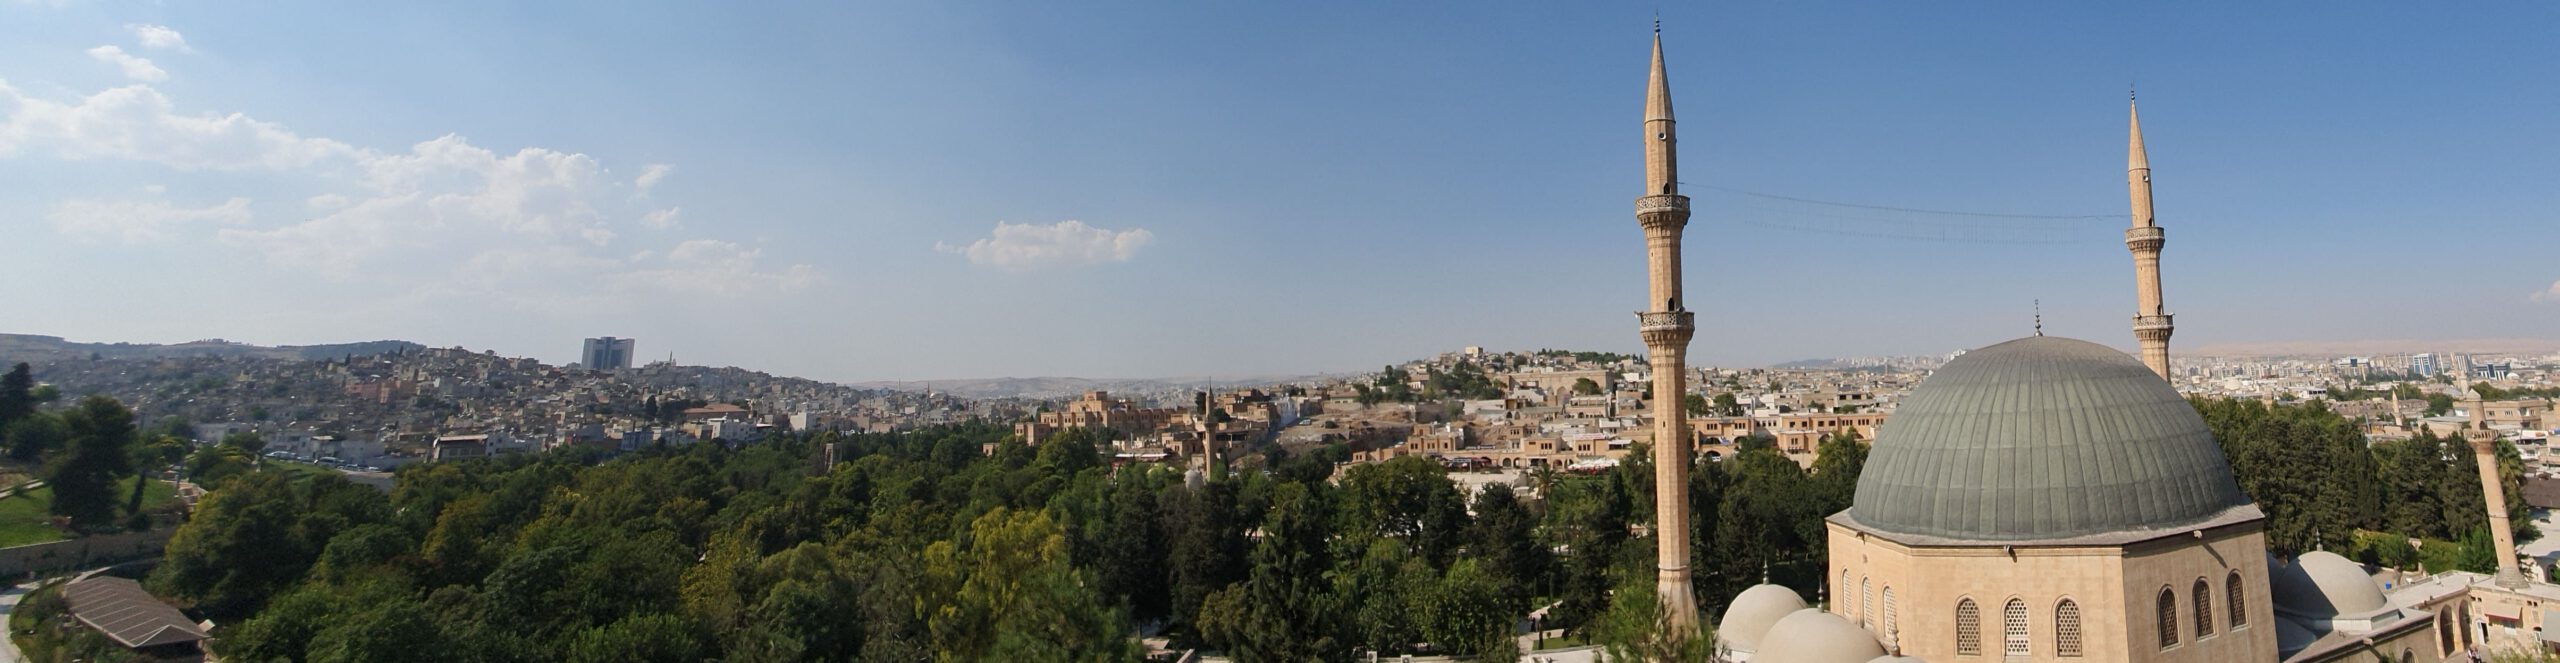 Panorama of the ancient city of Riha/Urfa. Mosque with large dome and two minarets in foreground. Minaret of the 12th century Halil ul-Rahman Mosque is visible. City gardens. Old honey-colored buildings in the background.